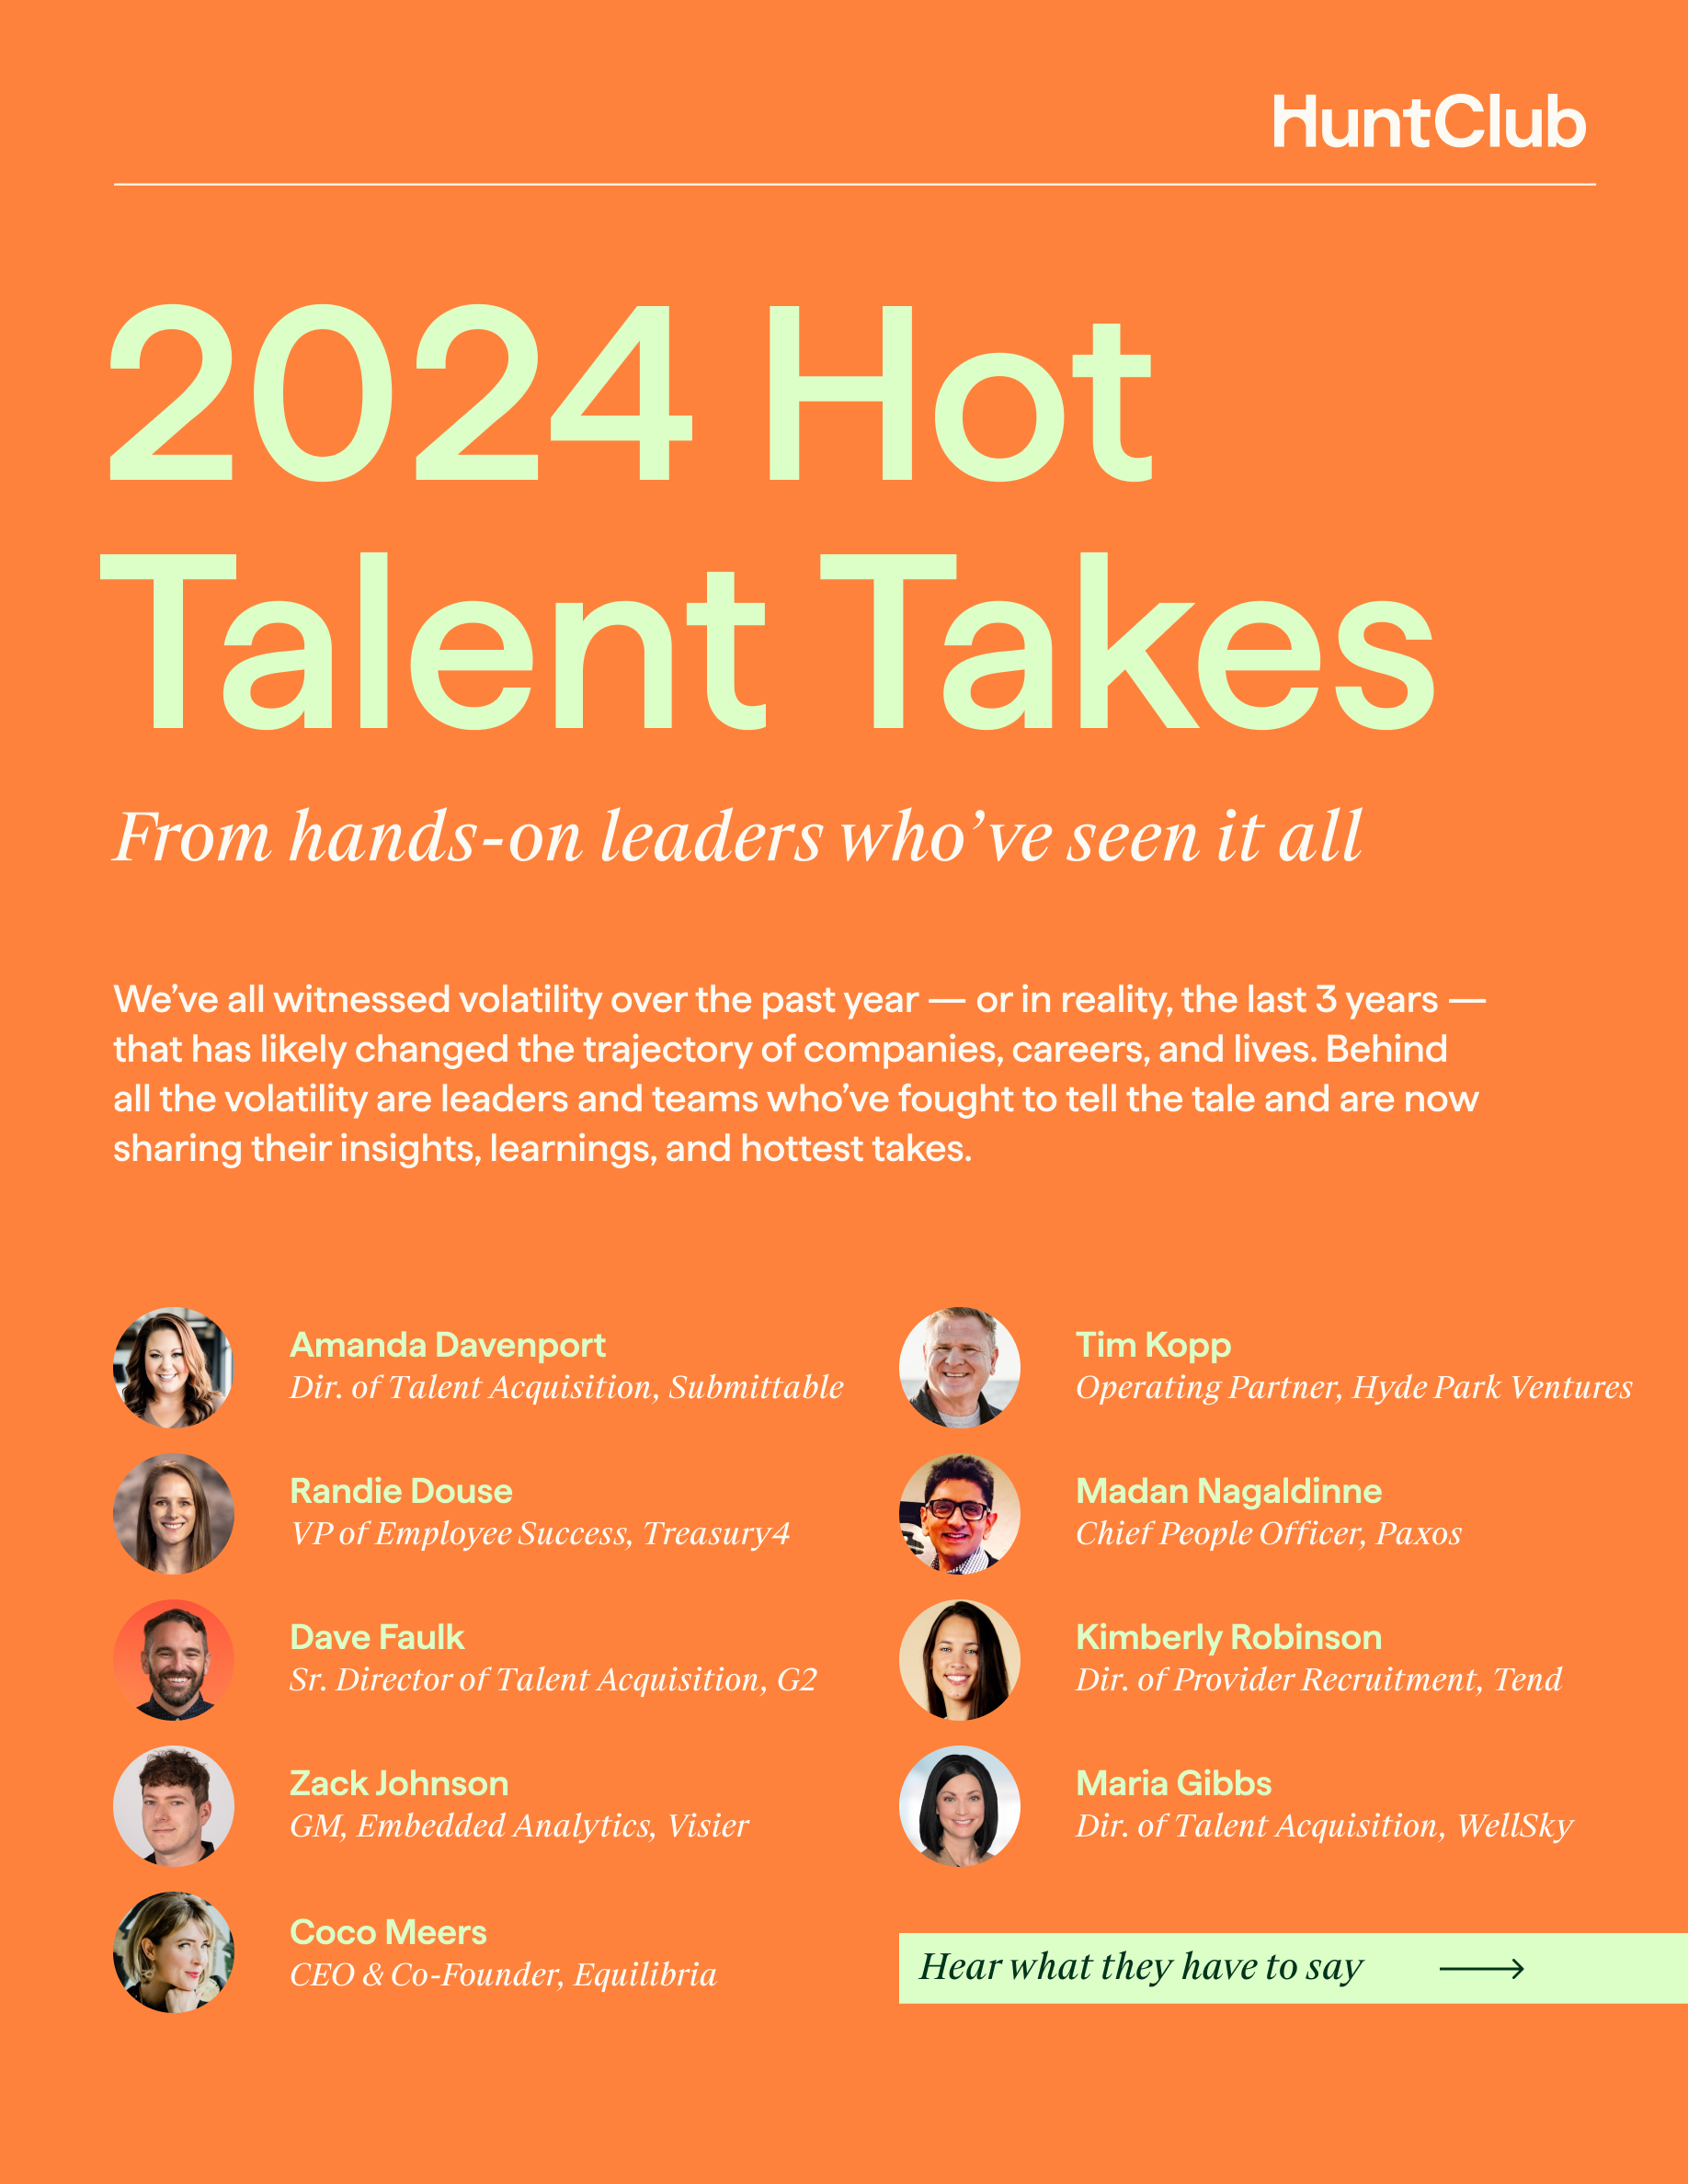 Hunt Club branded, orange cover page that reads "2024 Hot Talent Takes" as the title. It's followed by brief copy below that introduces the 9 talent leaders who contributed to a hot take to the report and their headshots next to them.